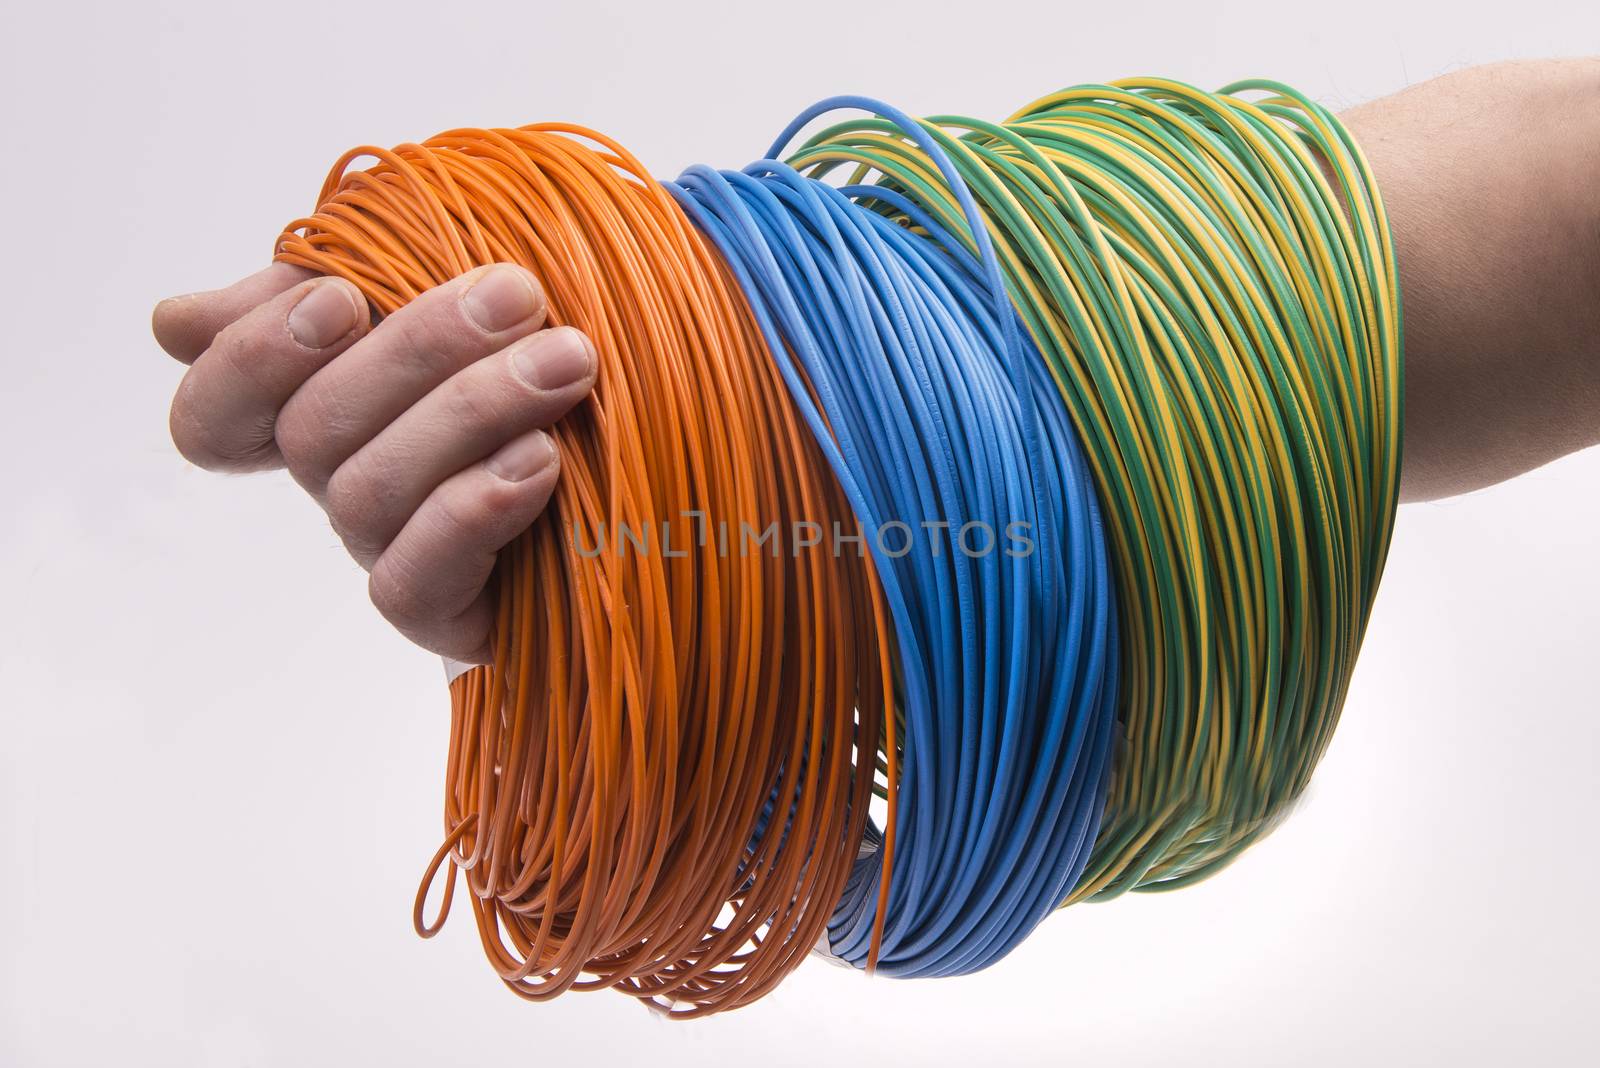 background, black, cable, coaxial, coil, color, communication, component, conductor, connect, connection, copper, cord, current, electric, electrical, electricity, electronics, energy, equipment, fiber, group, hank, high, industrial, industry, insulation, internet, isolated, line, link, macro, metal, network, object, plastic, power, reel, roll, rope, skein, spiral, spool, supply, technology, twisted, voltage, white, wire, wired